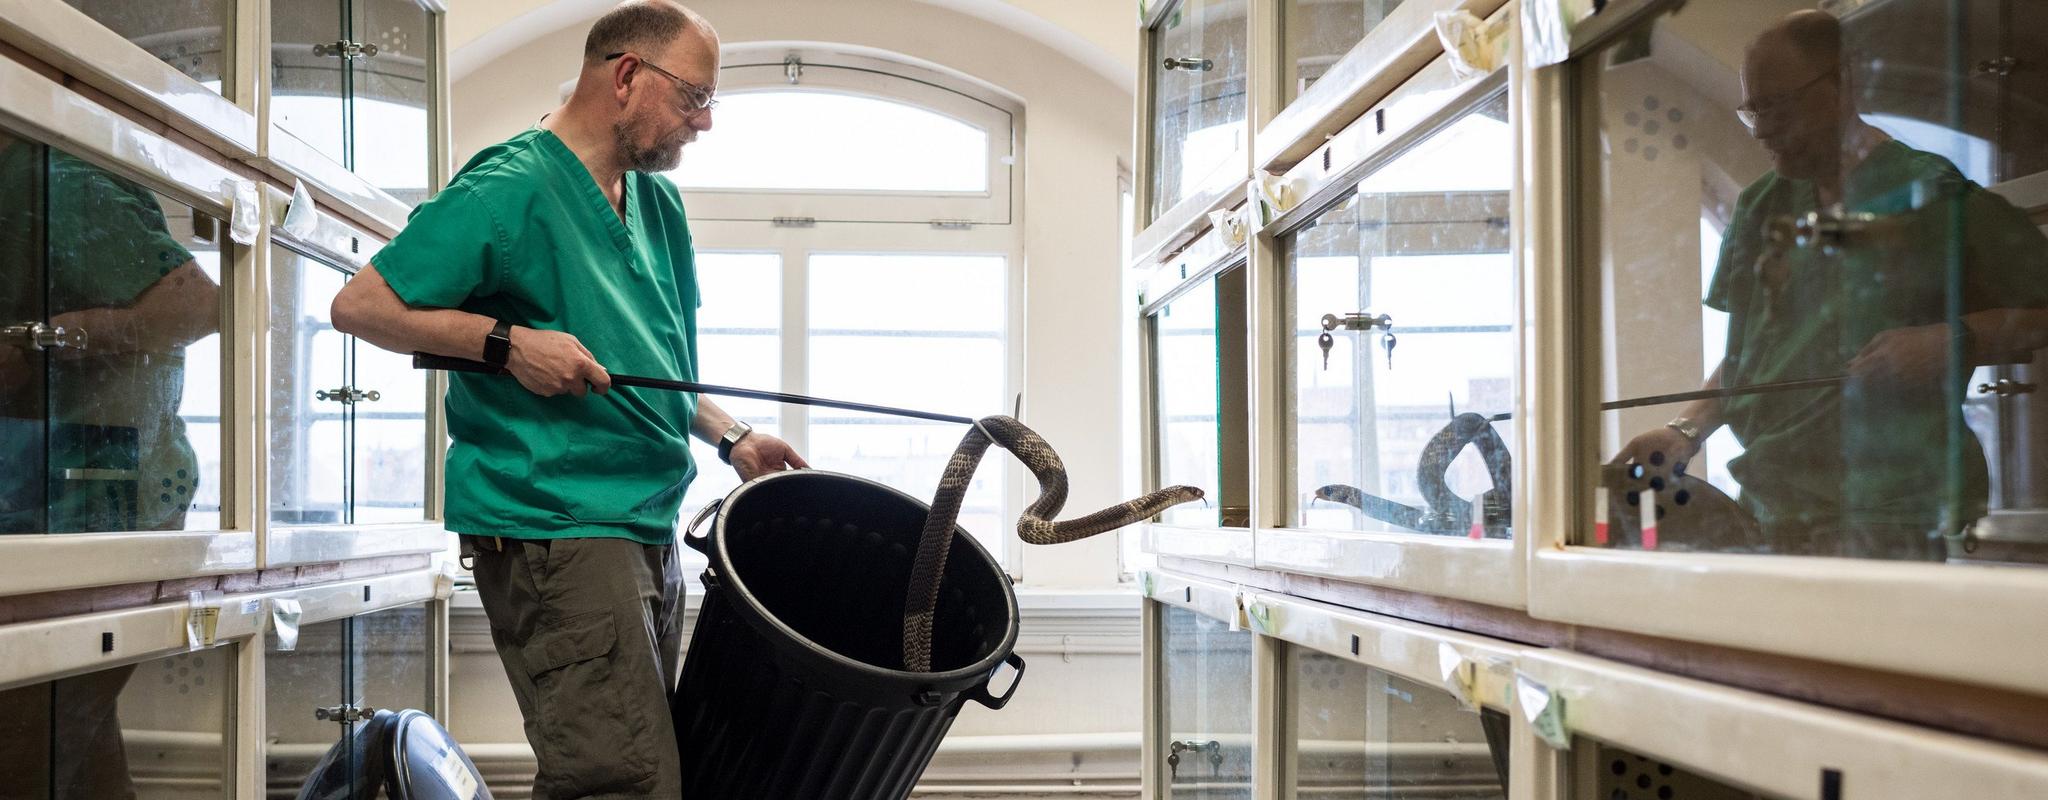 Man using a special hook to guide a snake into a vivarium in a long room full of viviariums